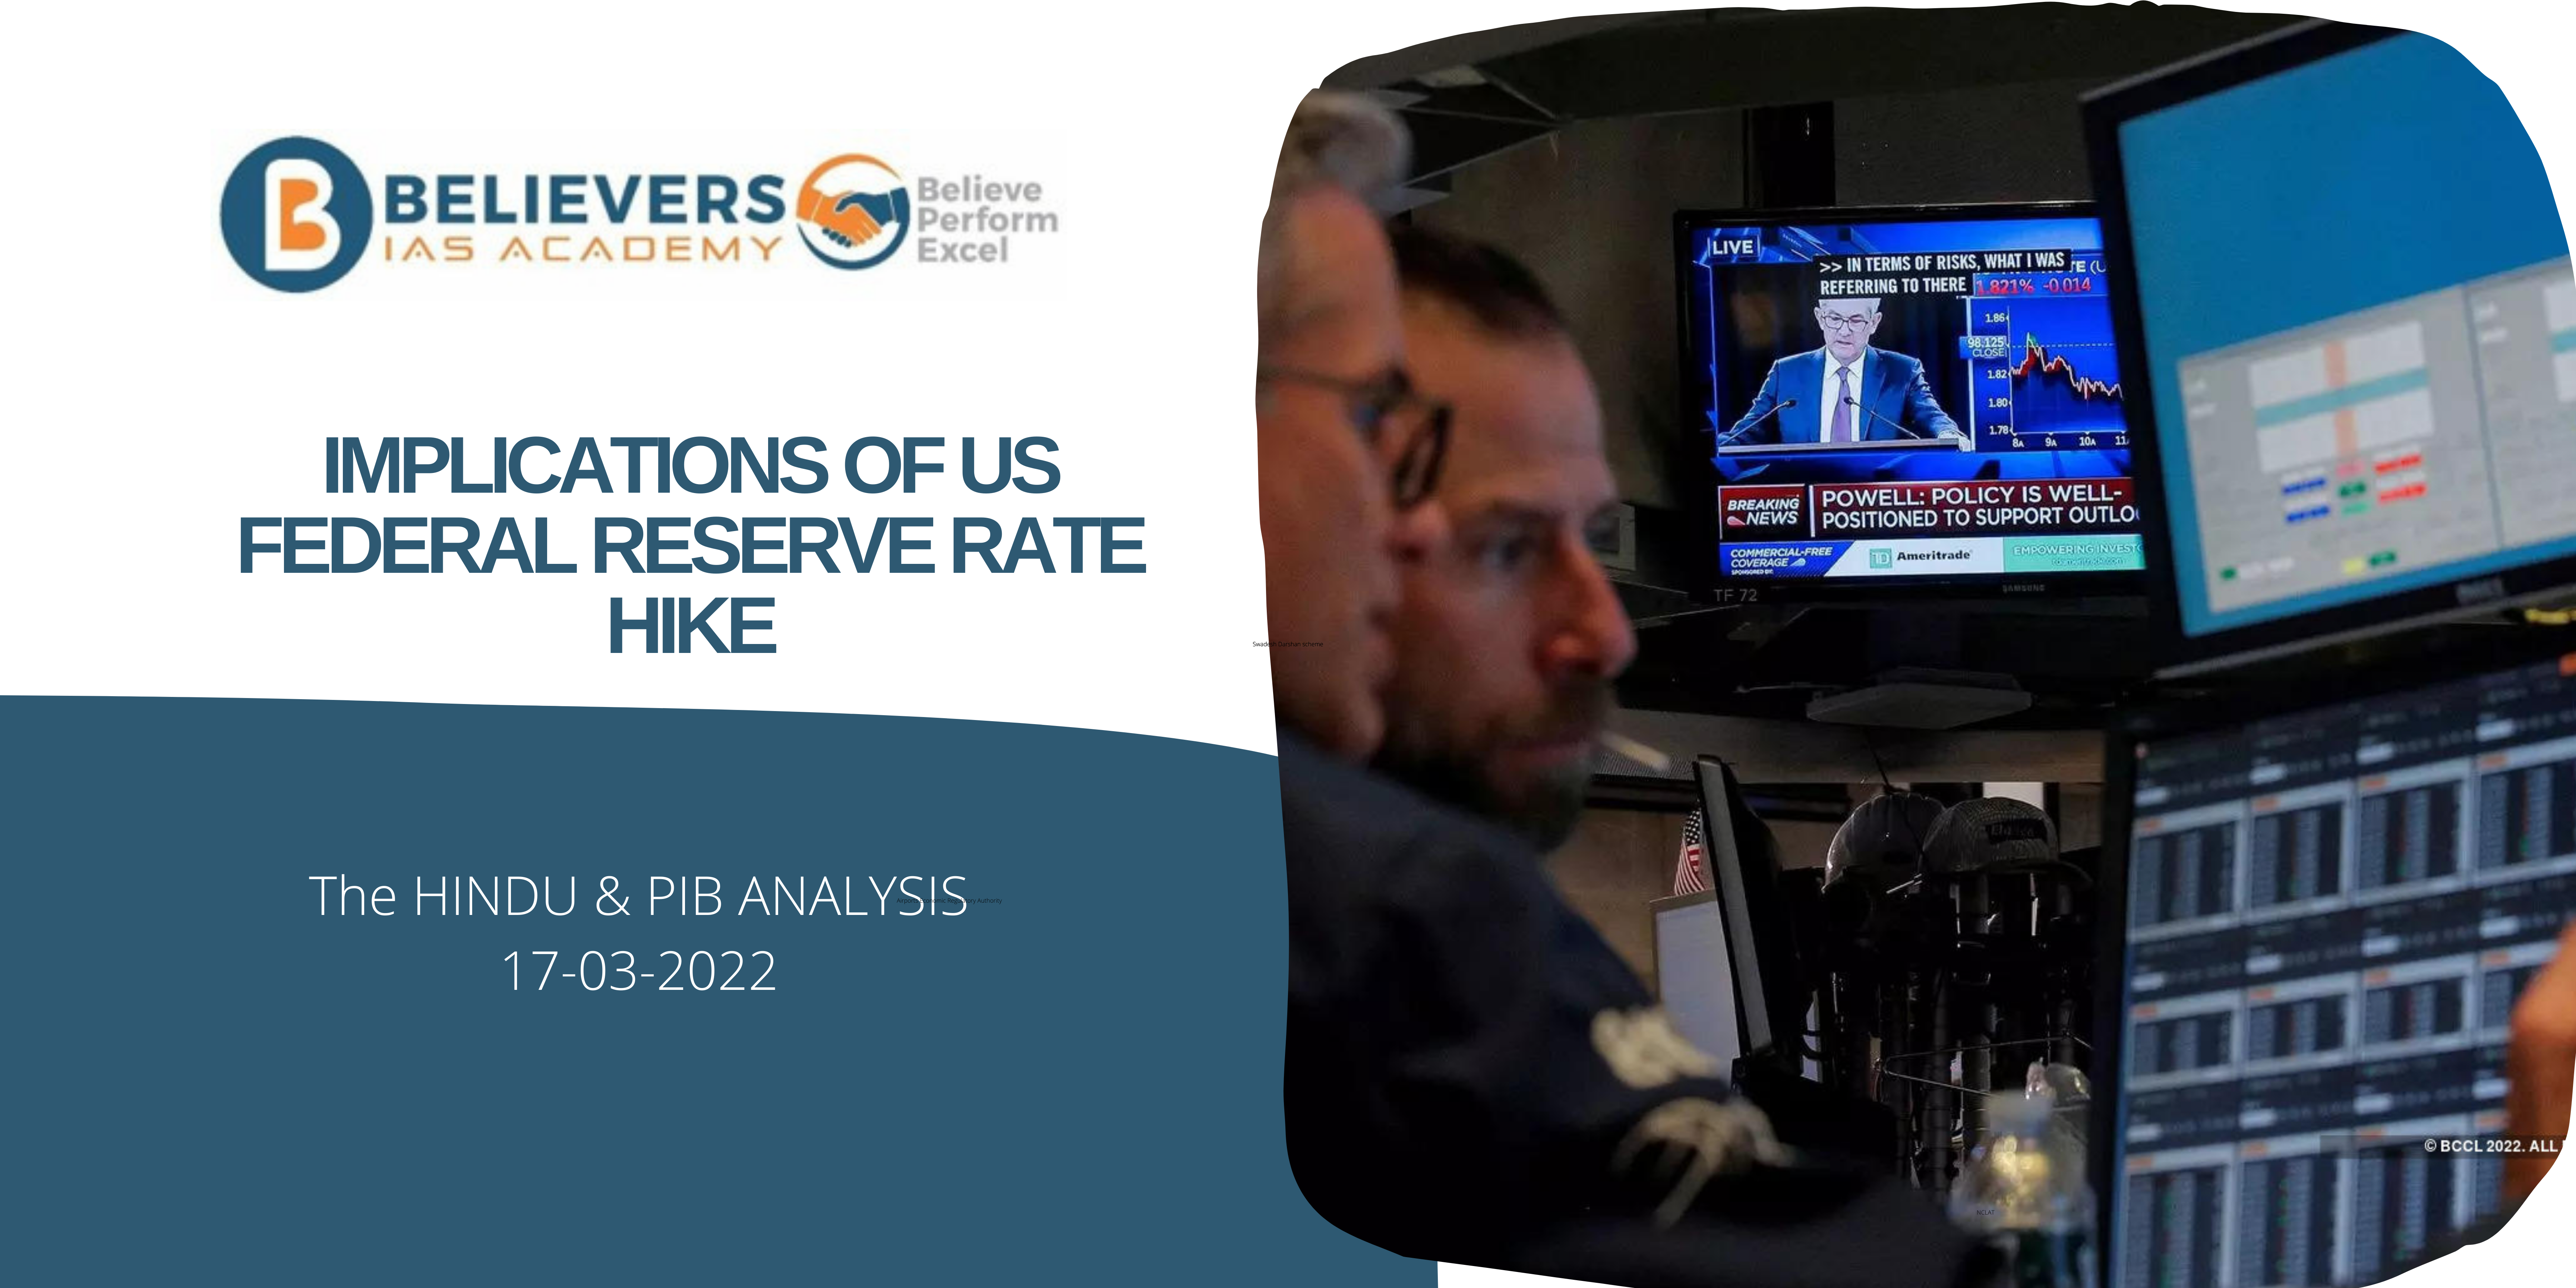 UPSC Current affairs - Implications of US Federal Reserve’s Rate Hike